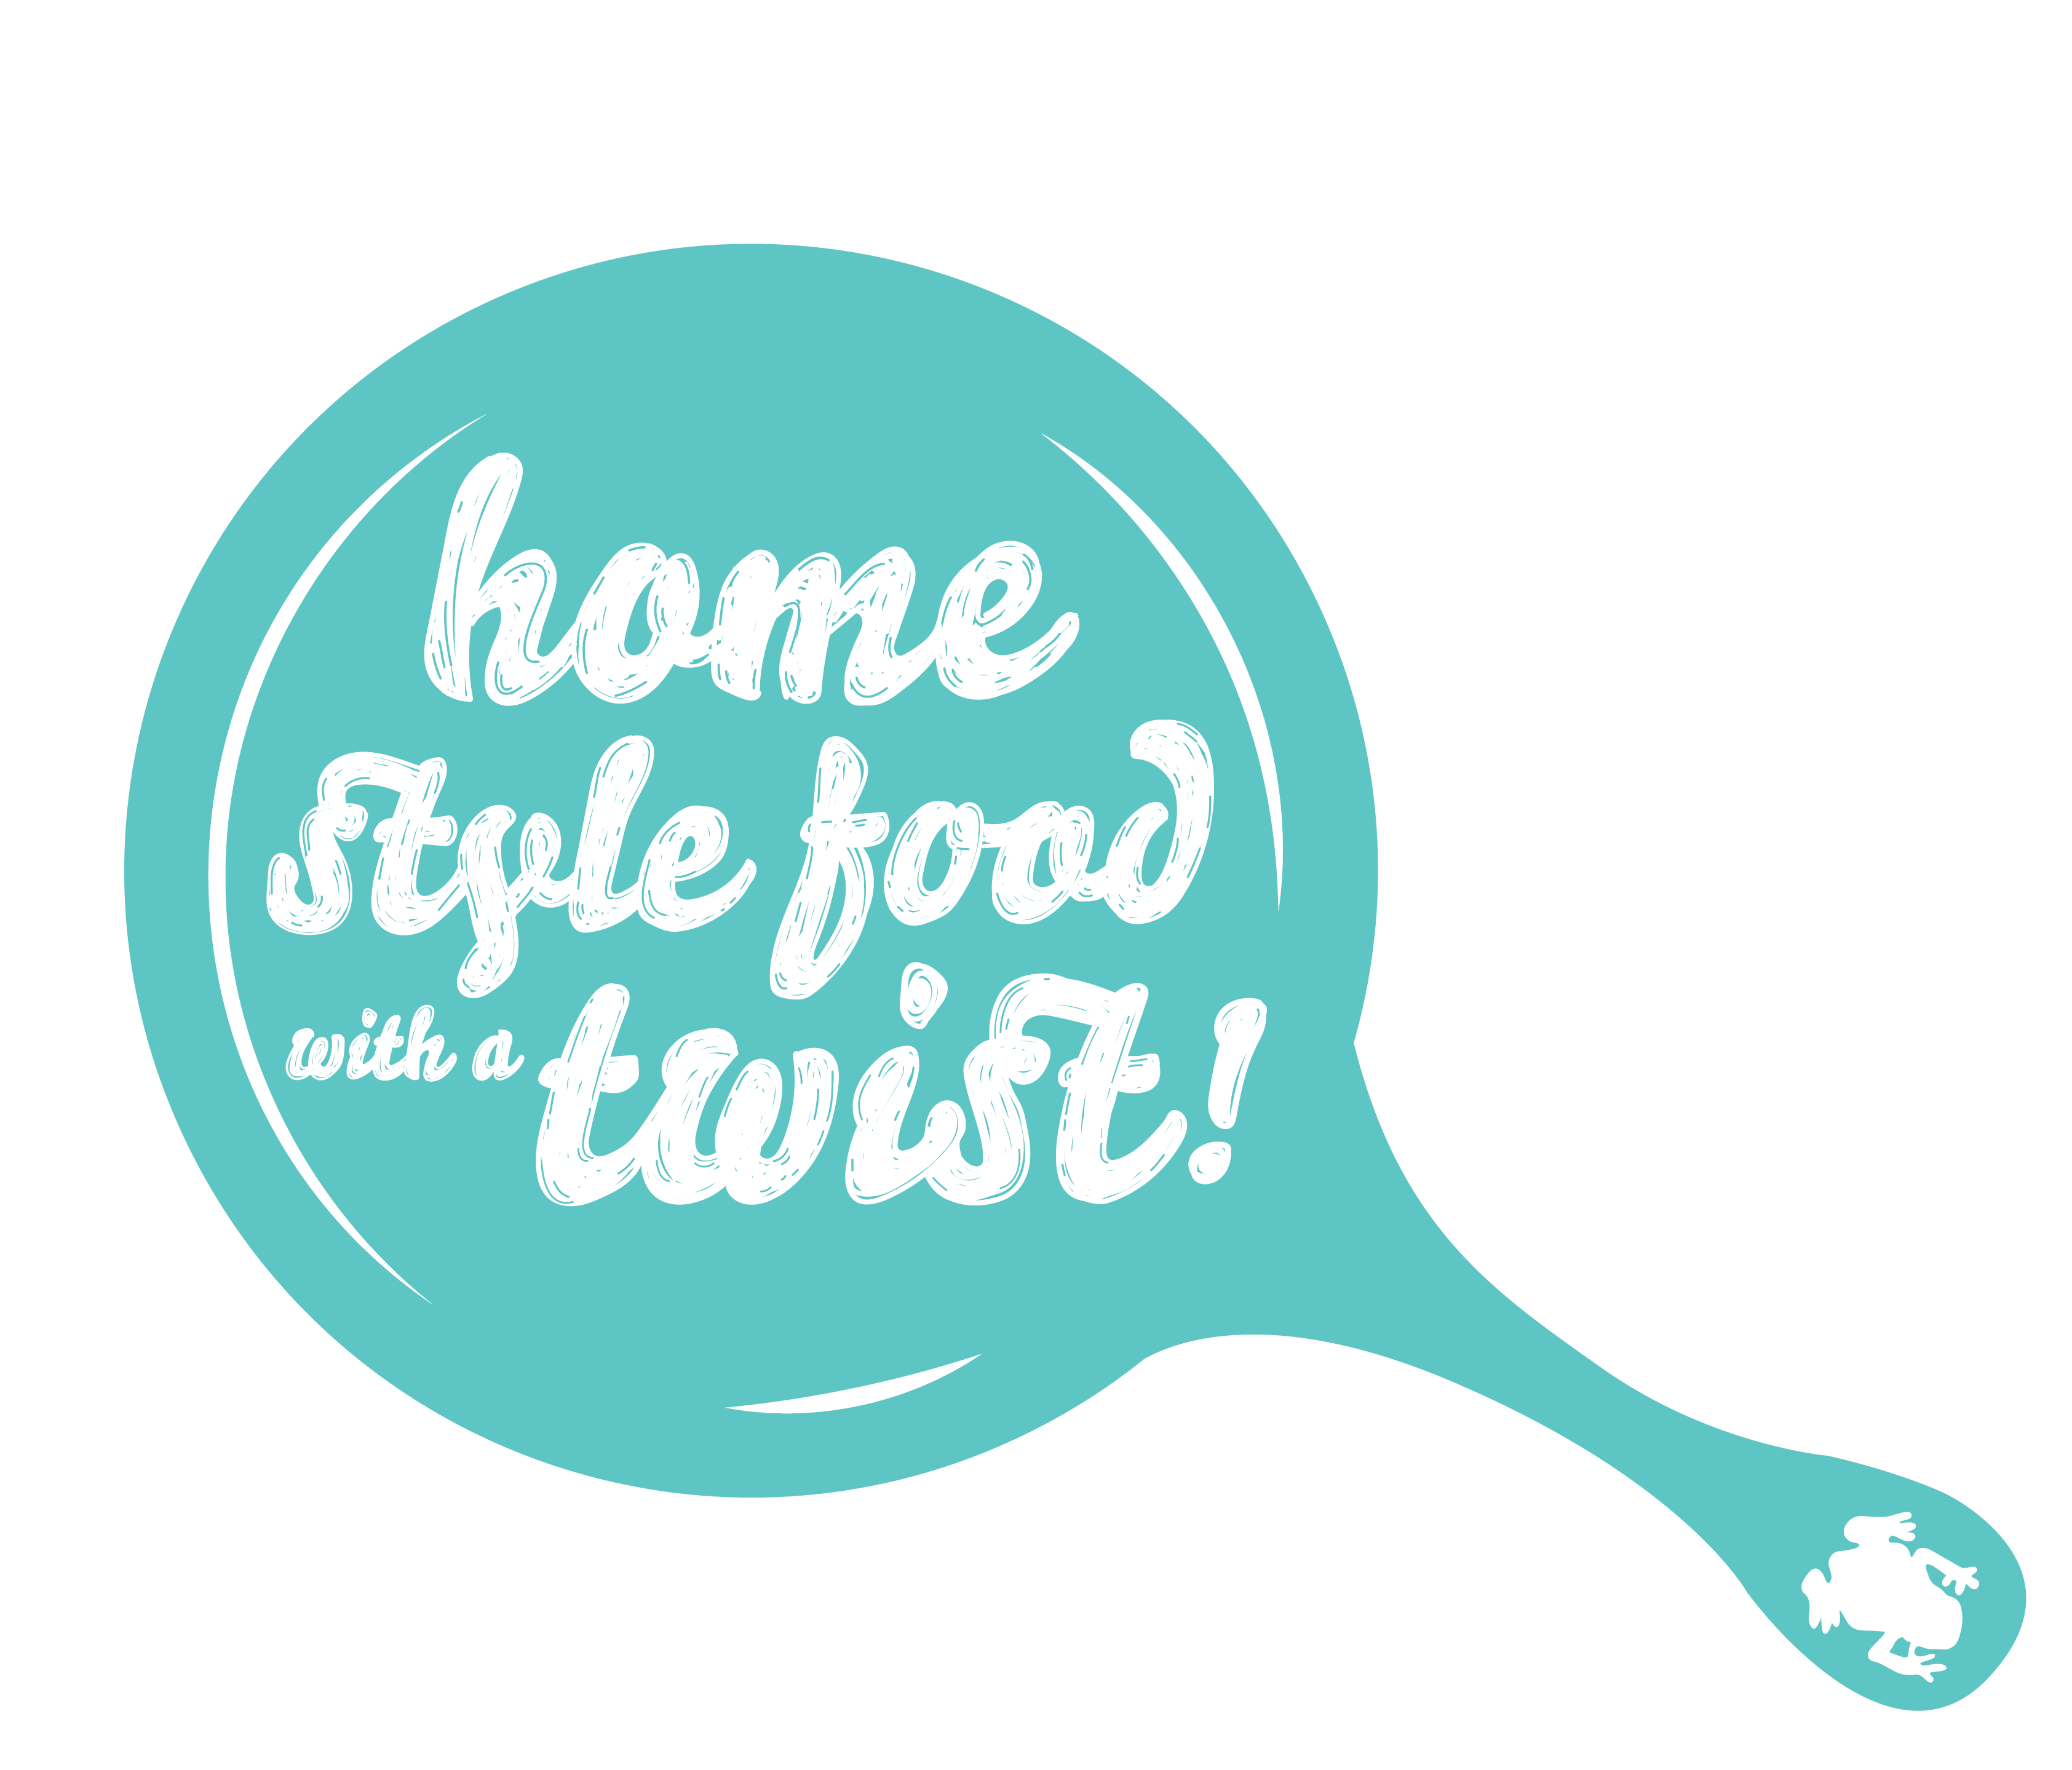 Home style food with a twist